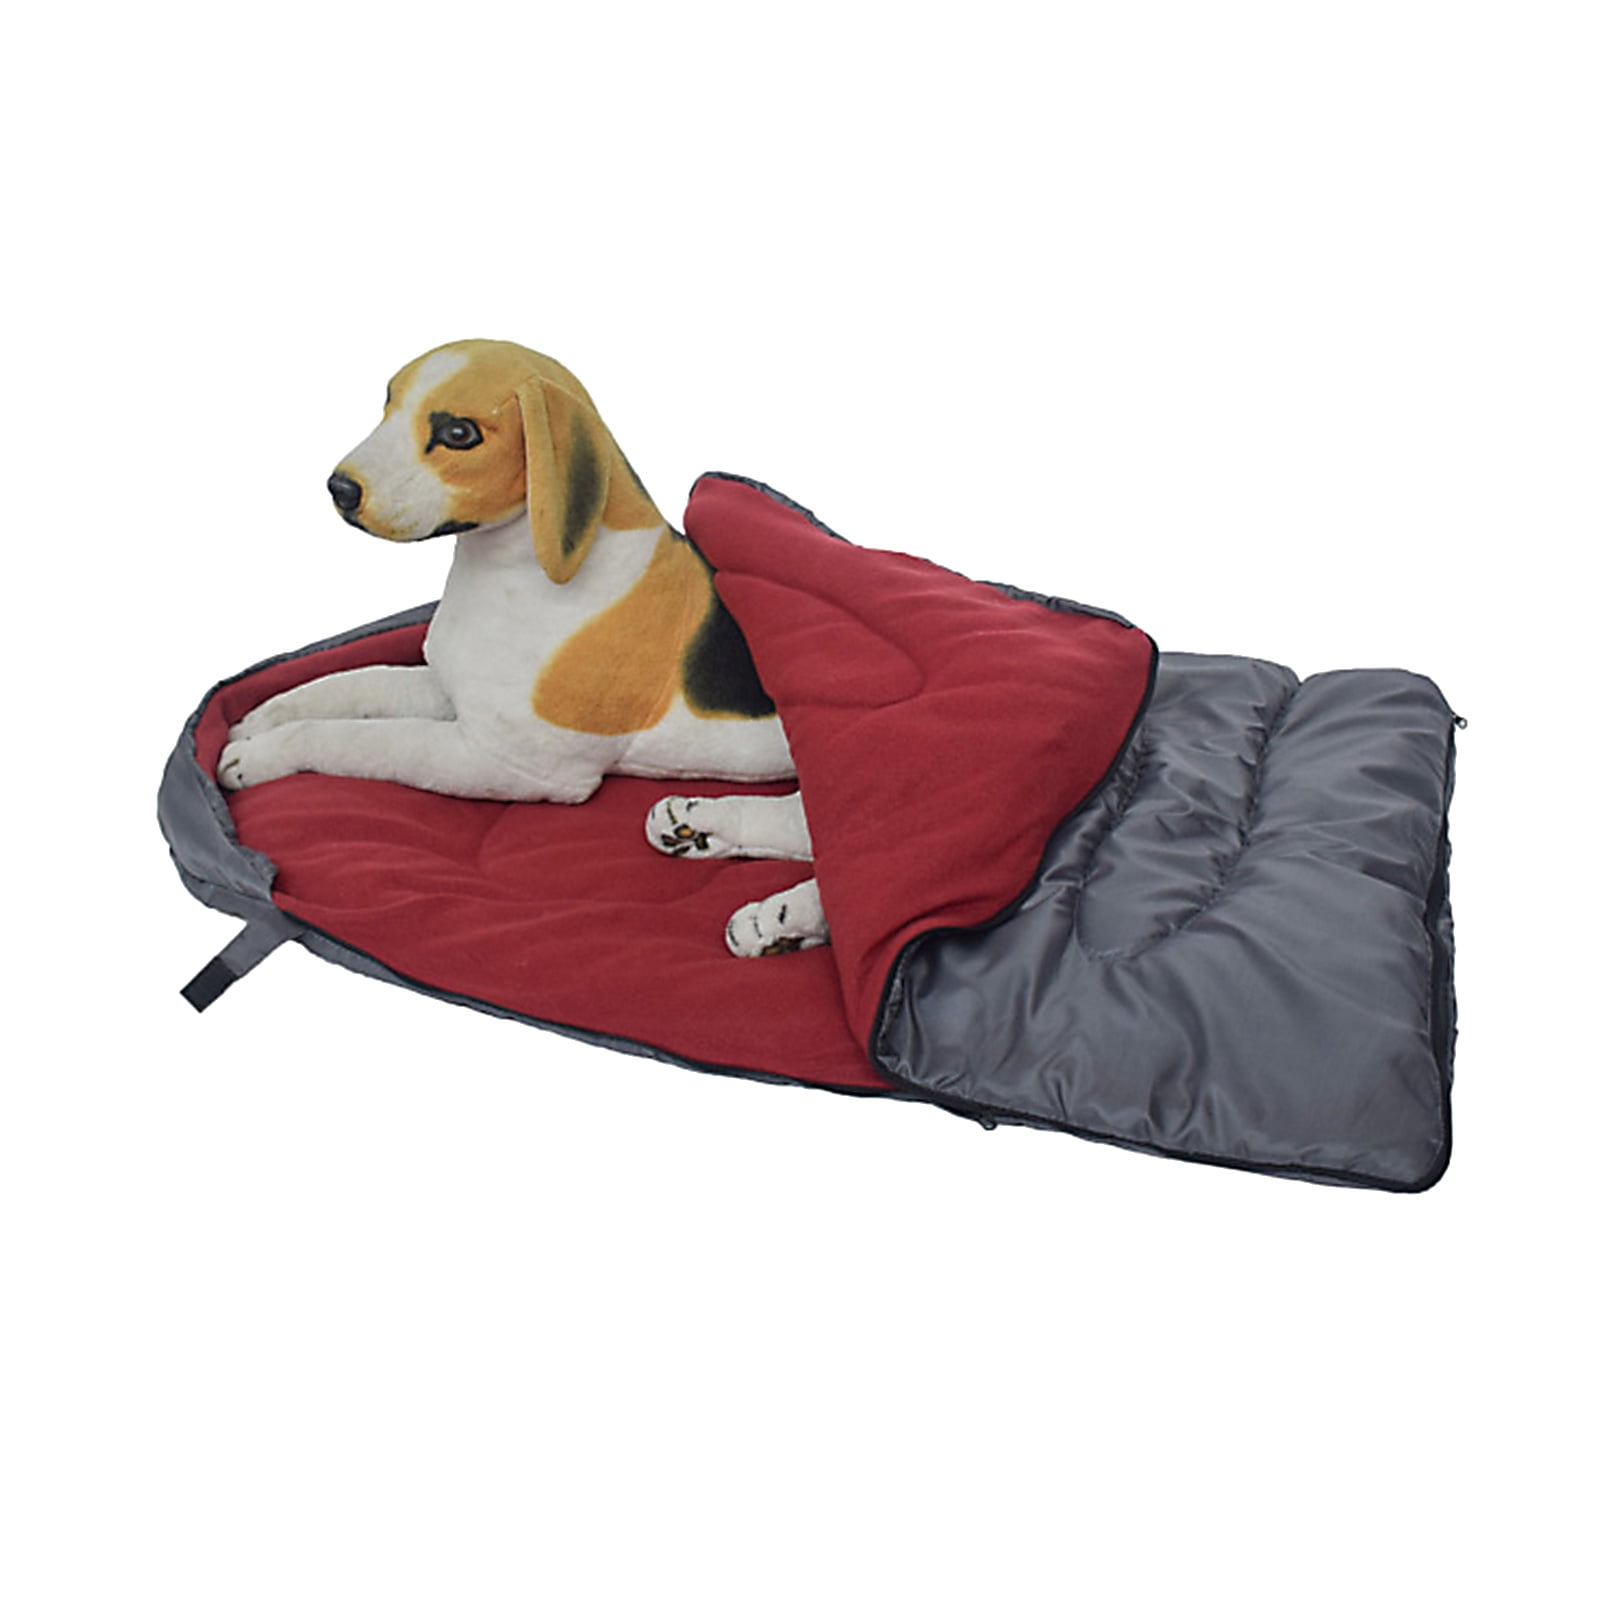 L, wine red Warm Soft Pet Bed Sleeping Bag Portable Dog Bed Dog and Cat Sleeping Bag